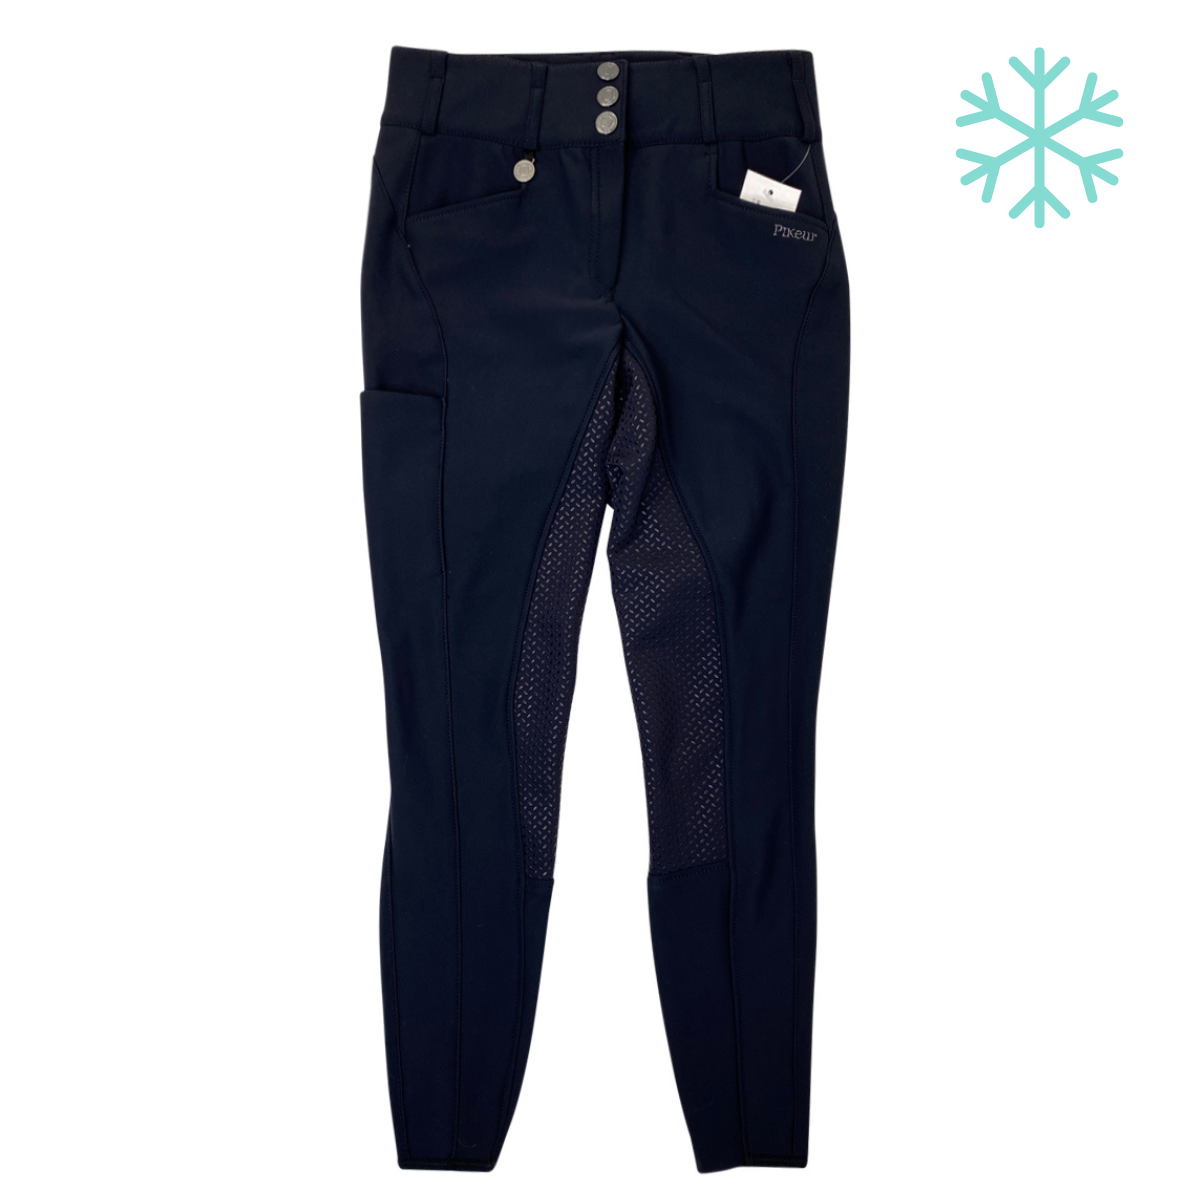 Pikeur 'Candela' Softshell Grip Full Seat Breeches in Navy